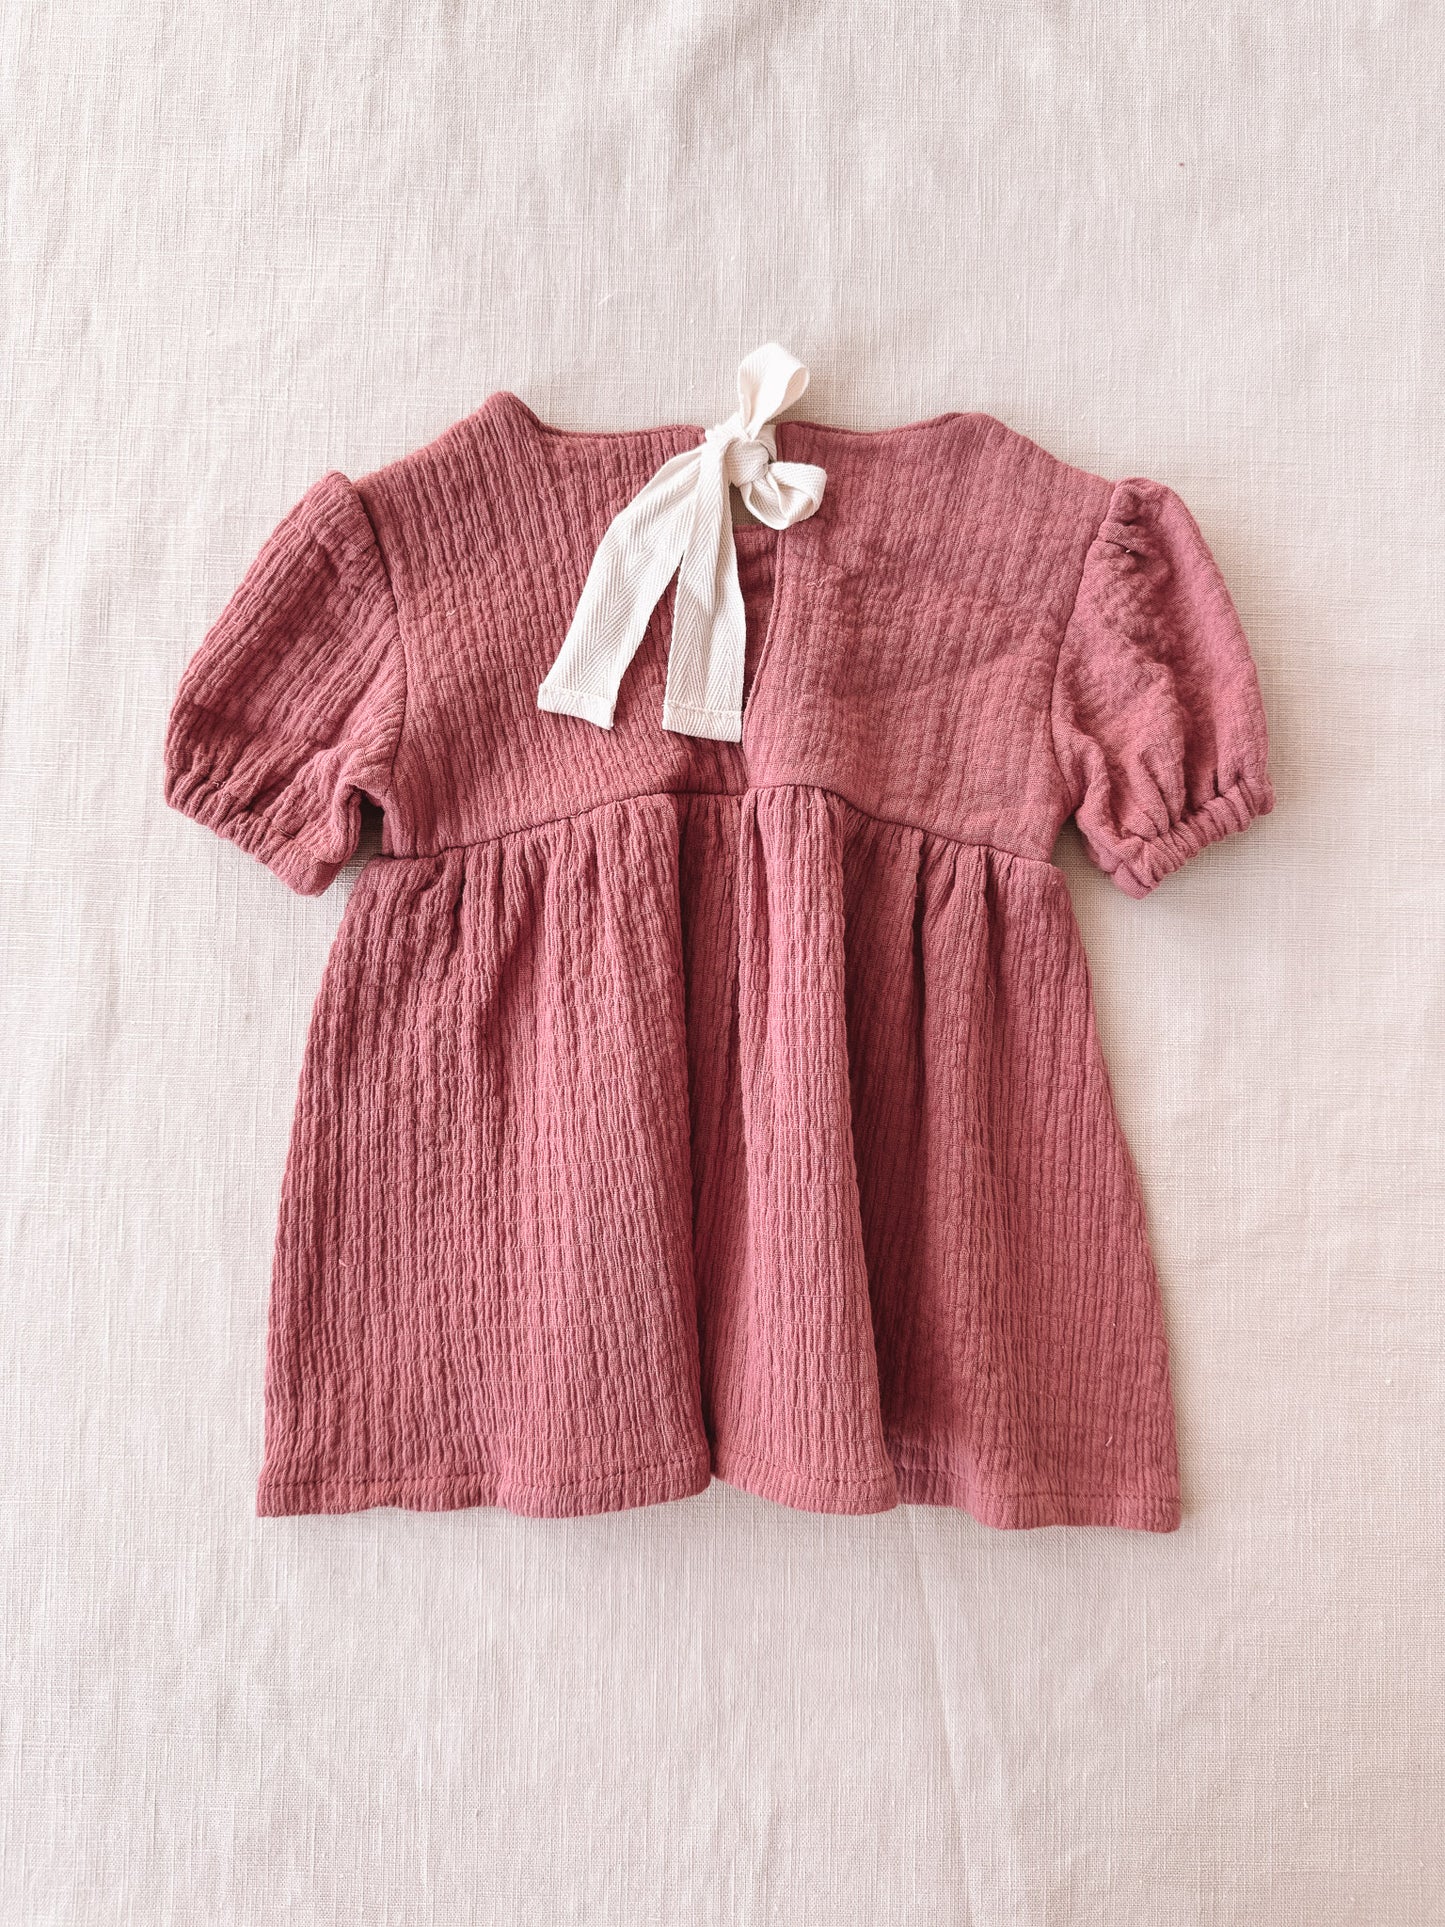 Florence baby dress / pink clay